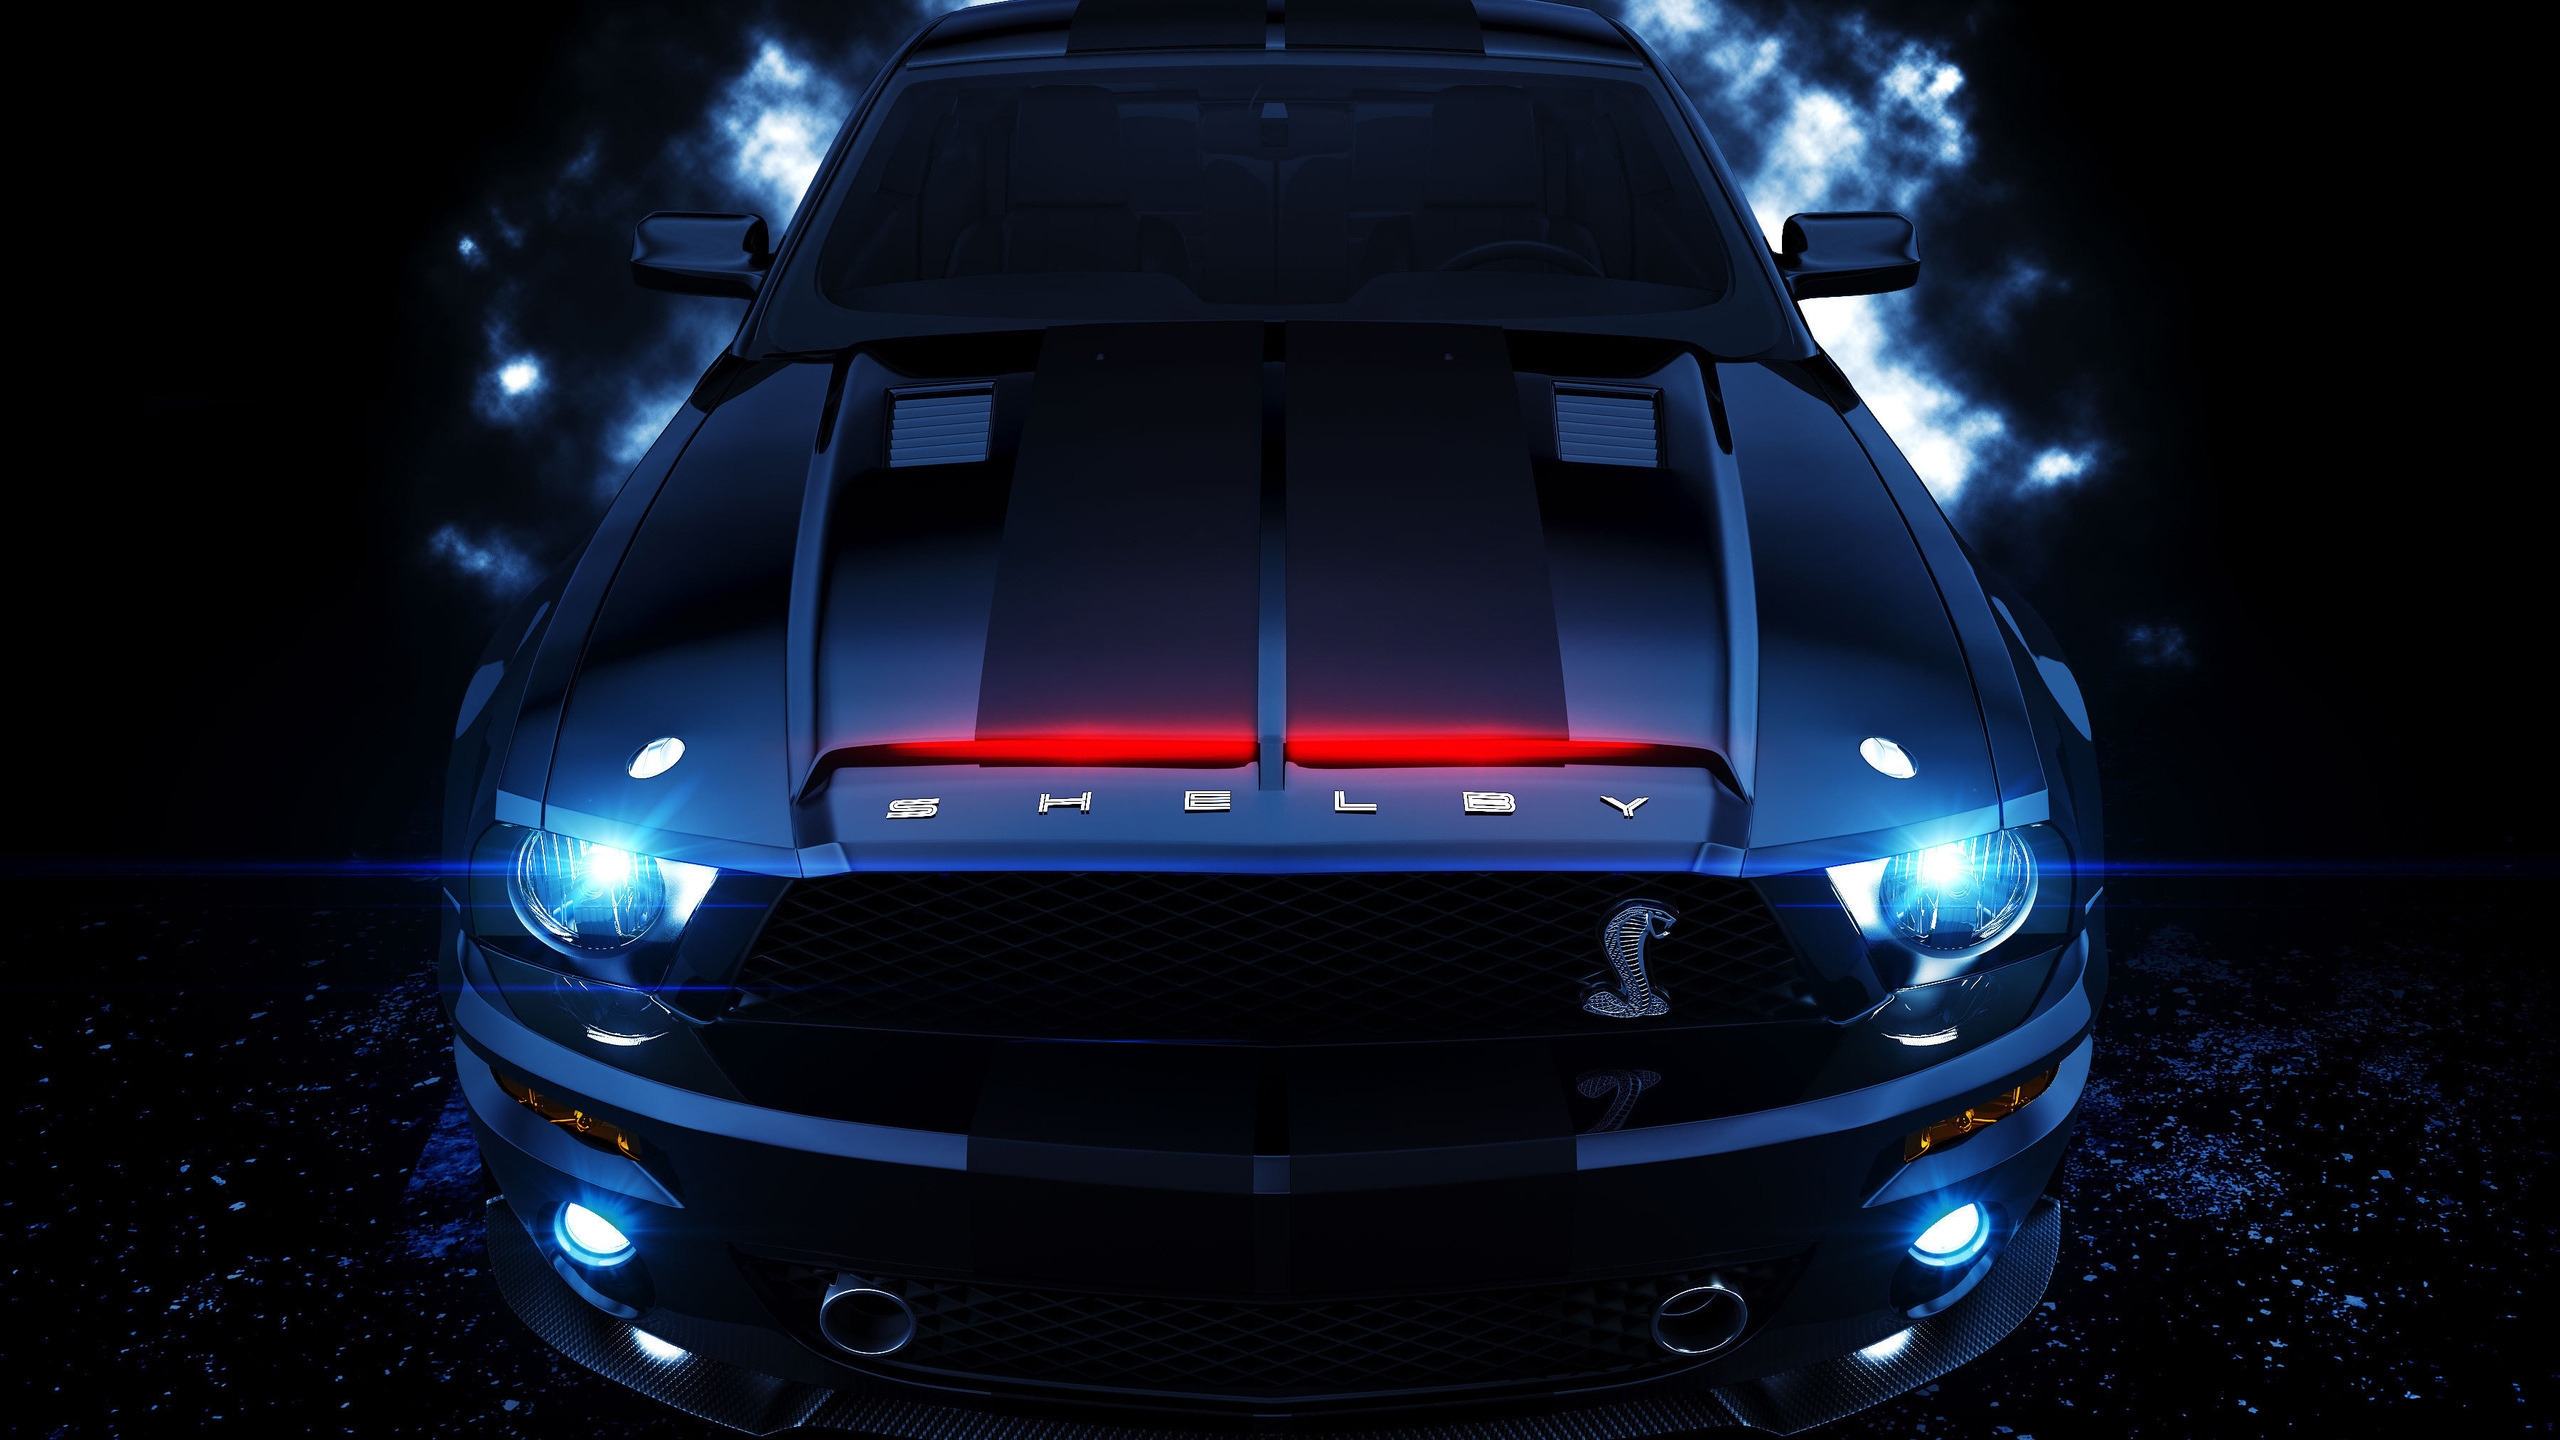 Amazing Shelby for 2560x1440 HDTV resolution